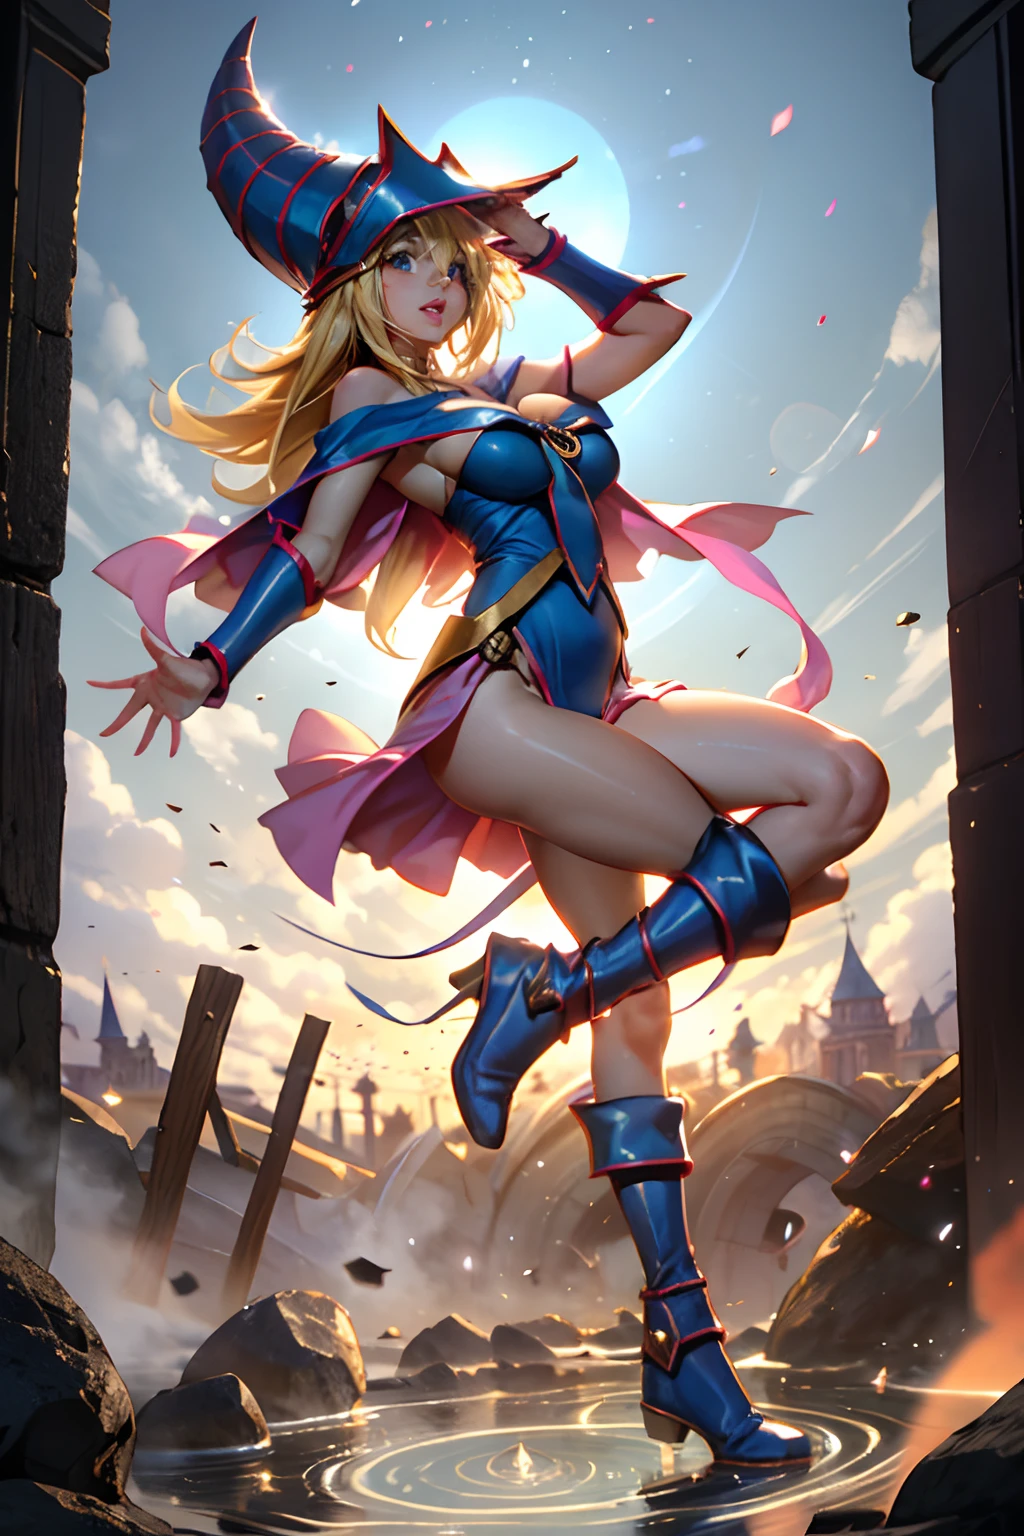 (Masterpiece:1.2), (The best quality:1.2), Perfect lighting, Dark Magician Girl casting a spell, floating in the air, Levitating over a magic circle , Circle Portal, big tits, open neckline, magic background. Seductive and sexy pose. Fireworks background.  dragon armaguedon